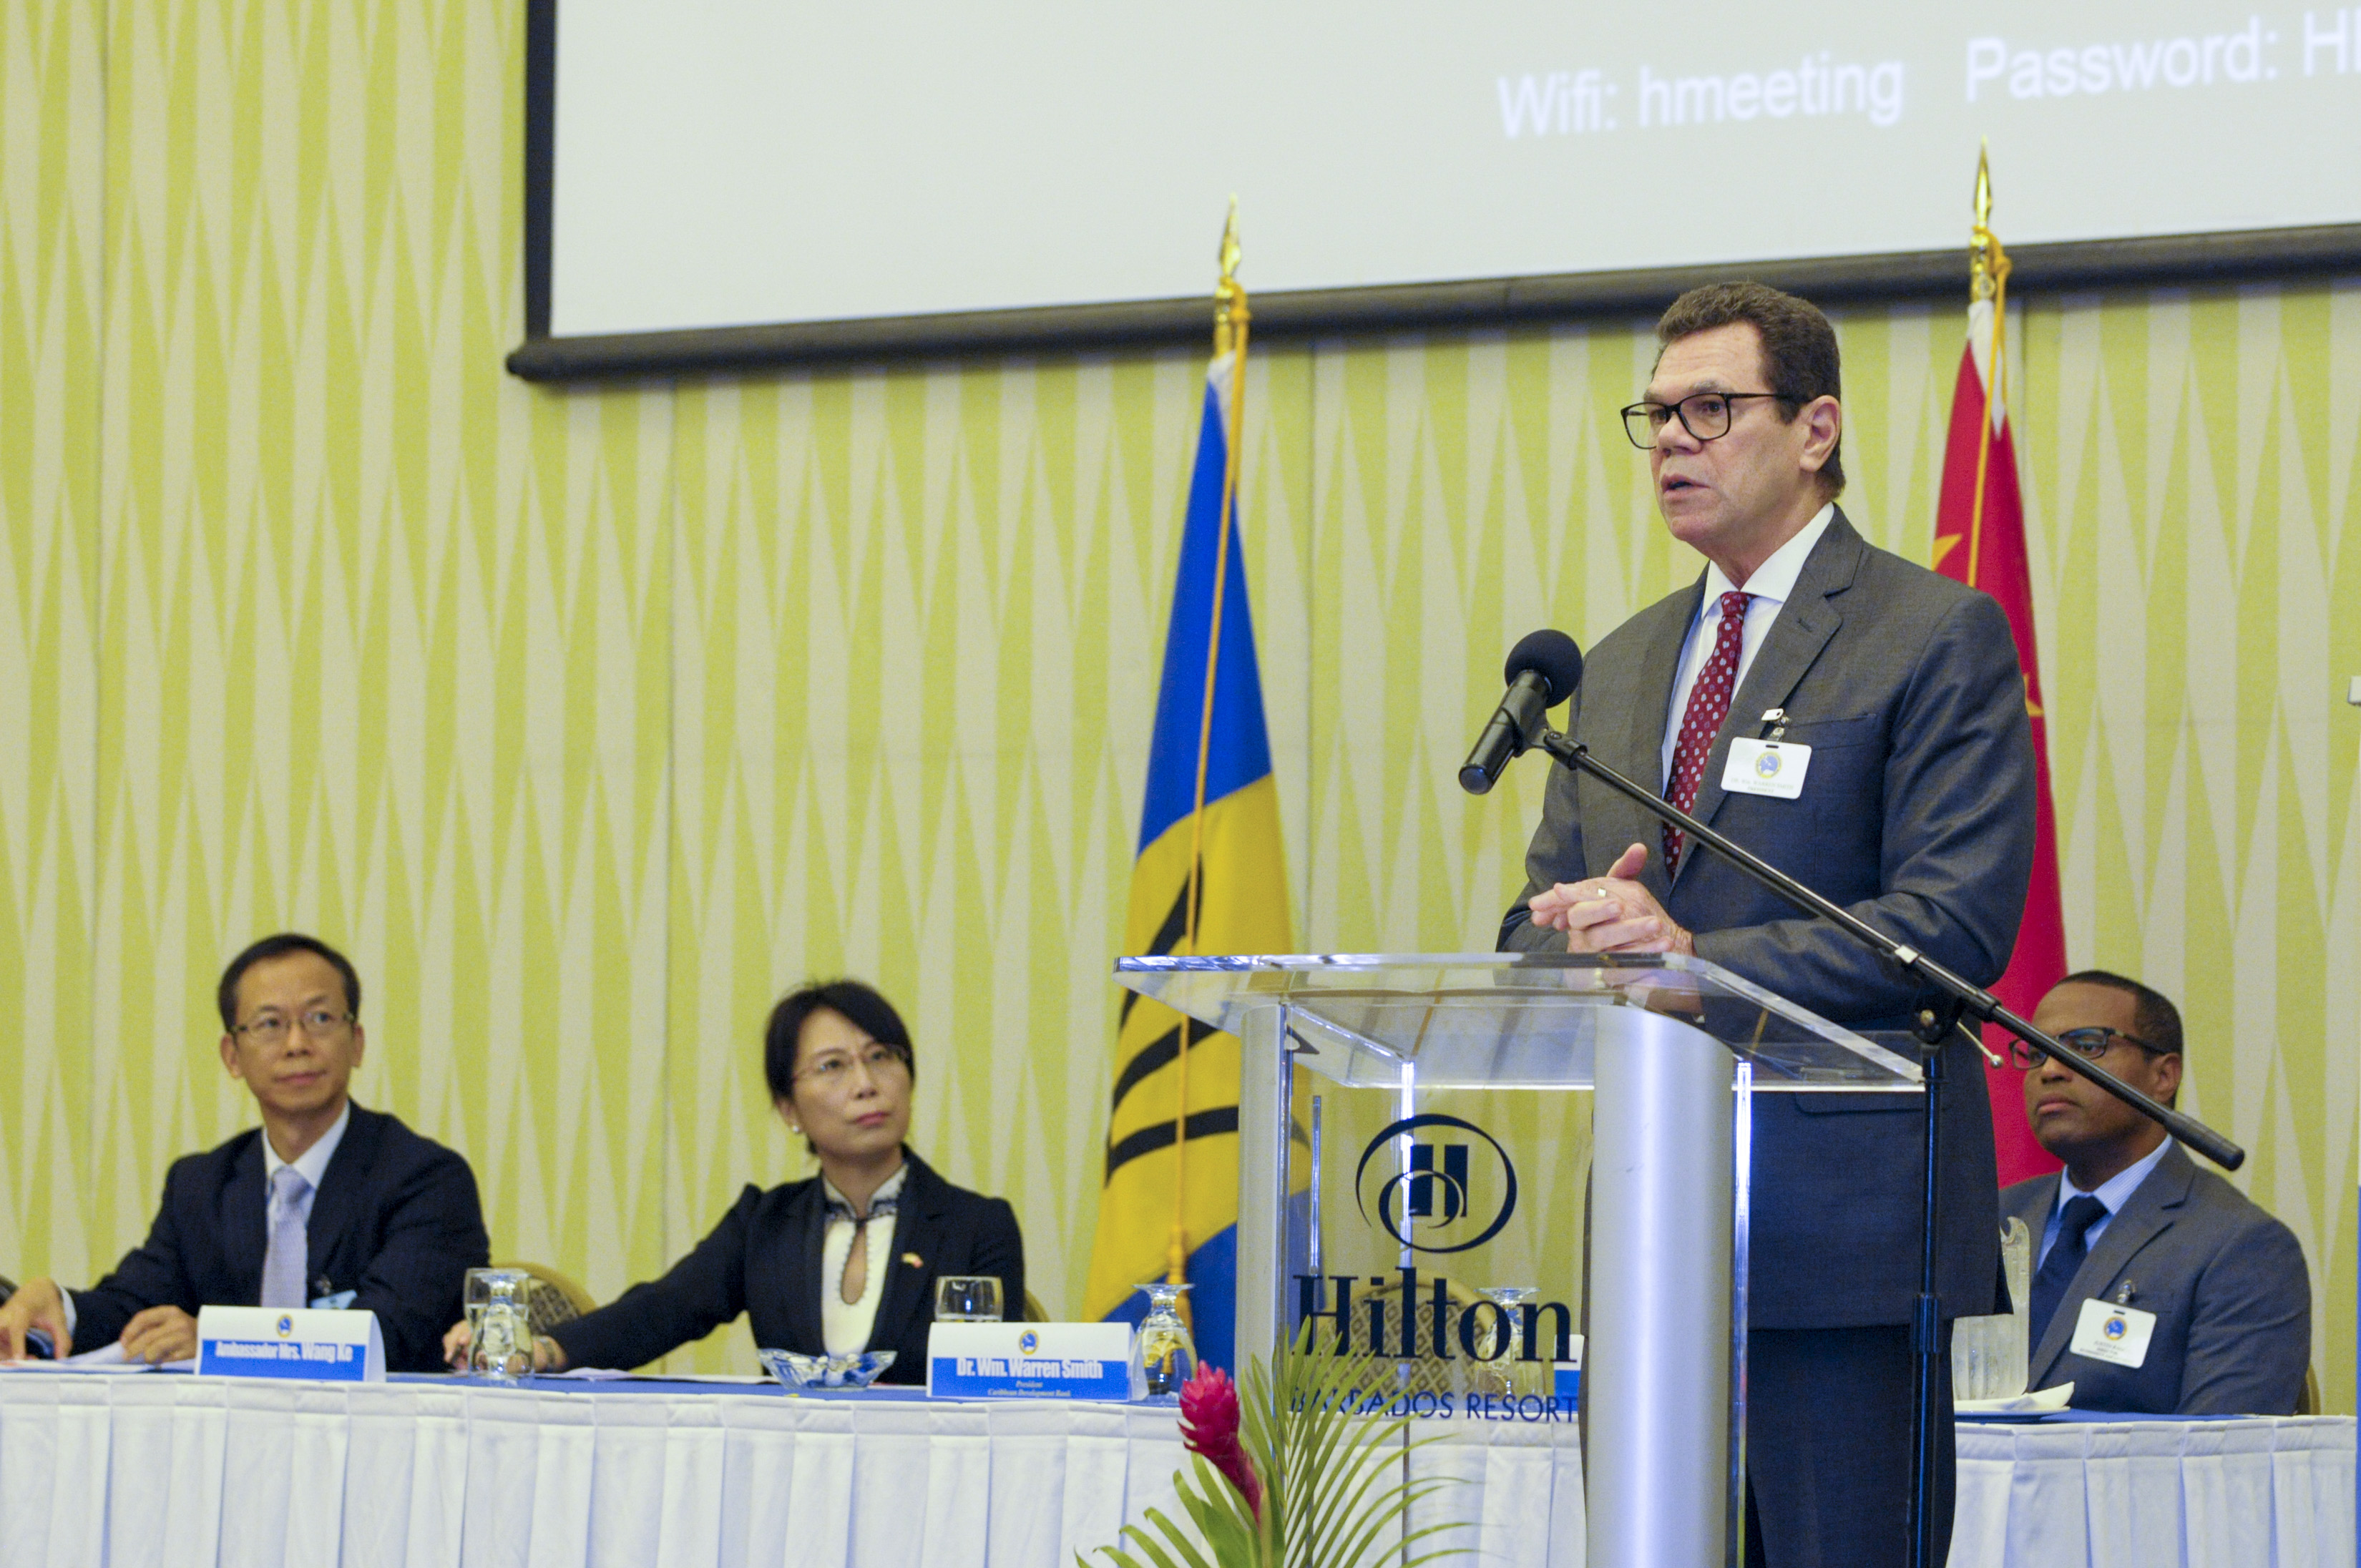 Dr. Warren Smith, President, CDB, speaking at the opening ceremony on July 10, 2017. Looking on are (L-R) Dr. Wen Xinxiang, Secretary General, Monetary Policy Committee, Director General, Monetary Policy Department, People’s Bank of China; Ambassador of the People’s Republic of China to Barbados, H.E. Wang Ke and Dr. Justin Ram, Director, Economics, CDB.